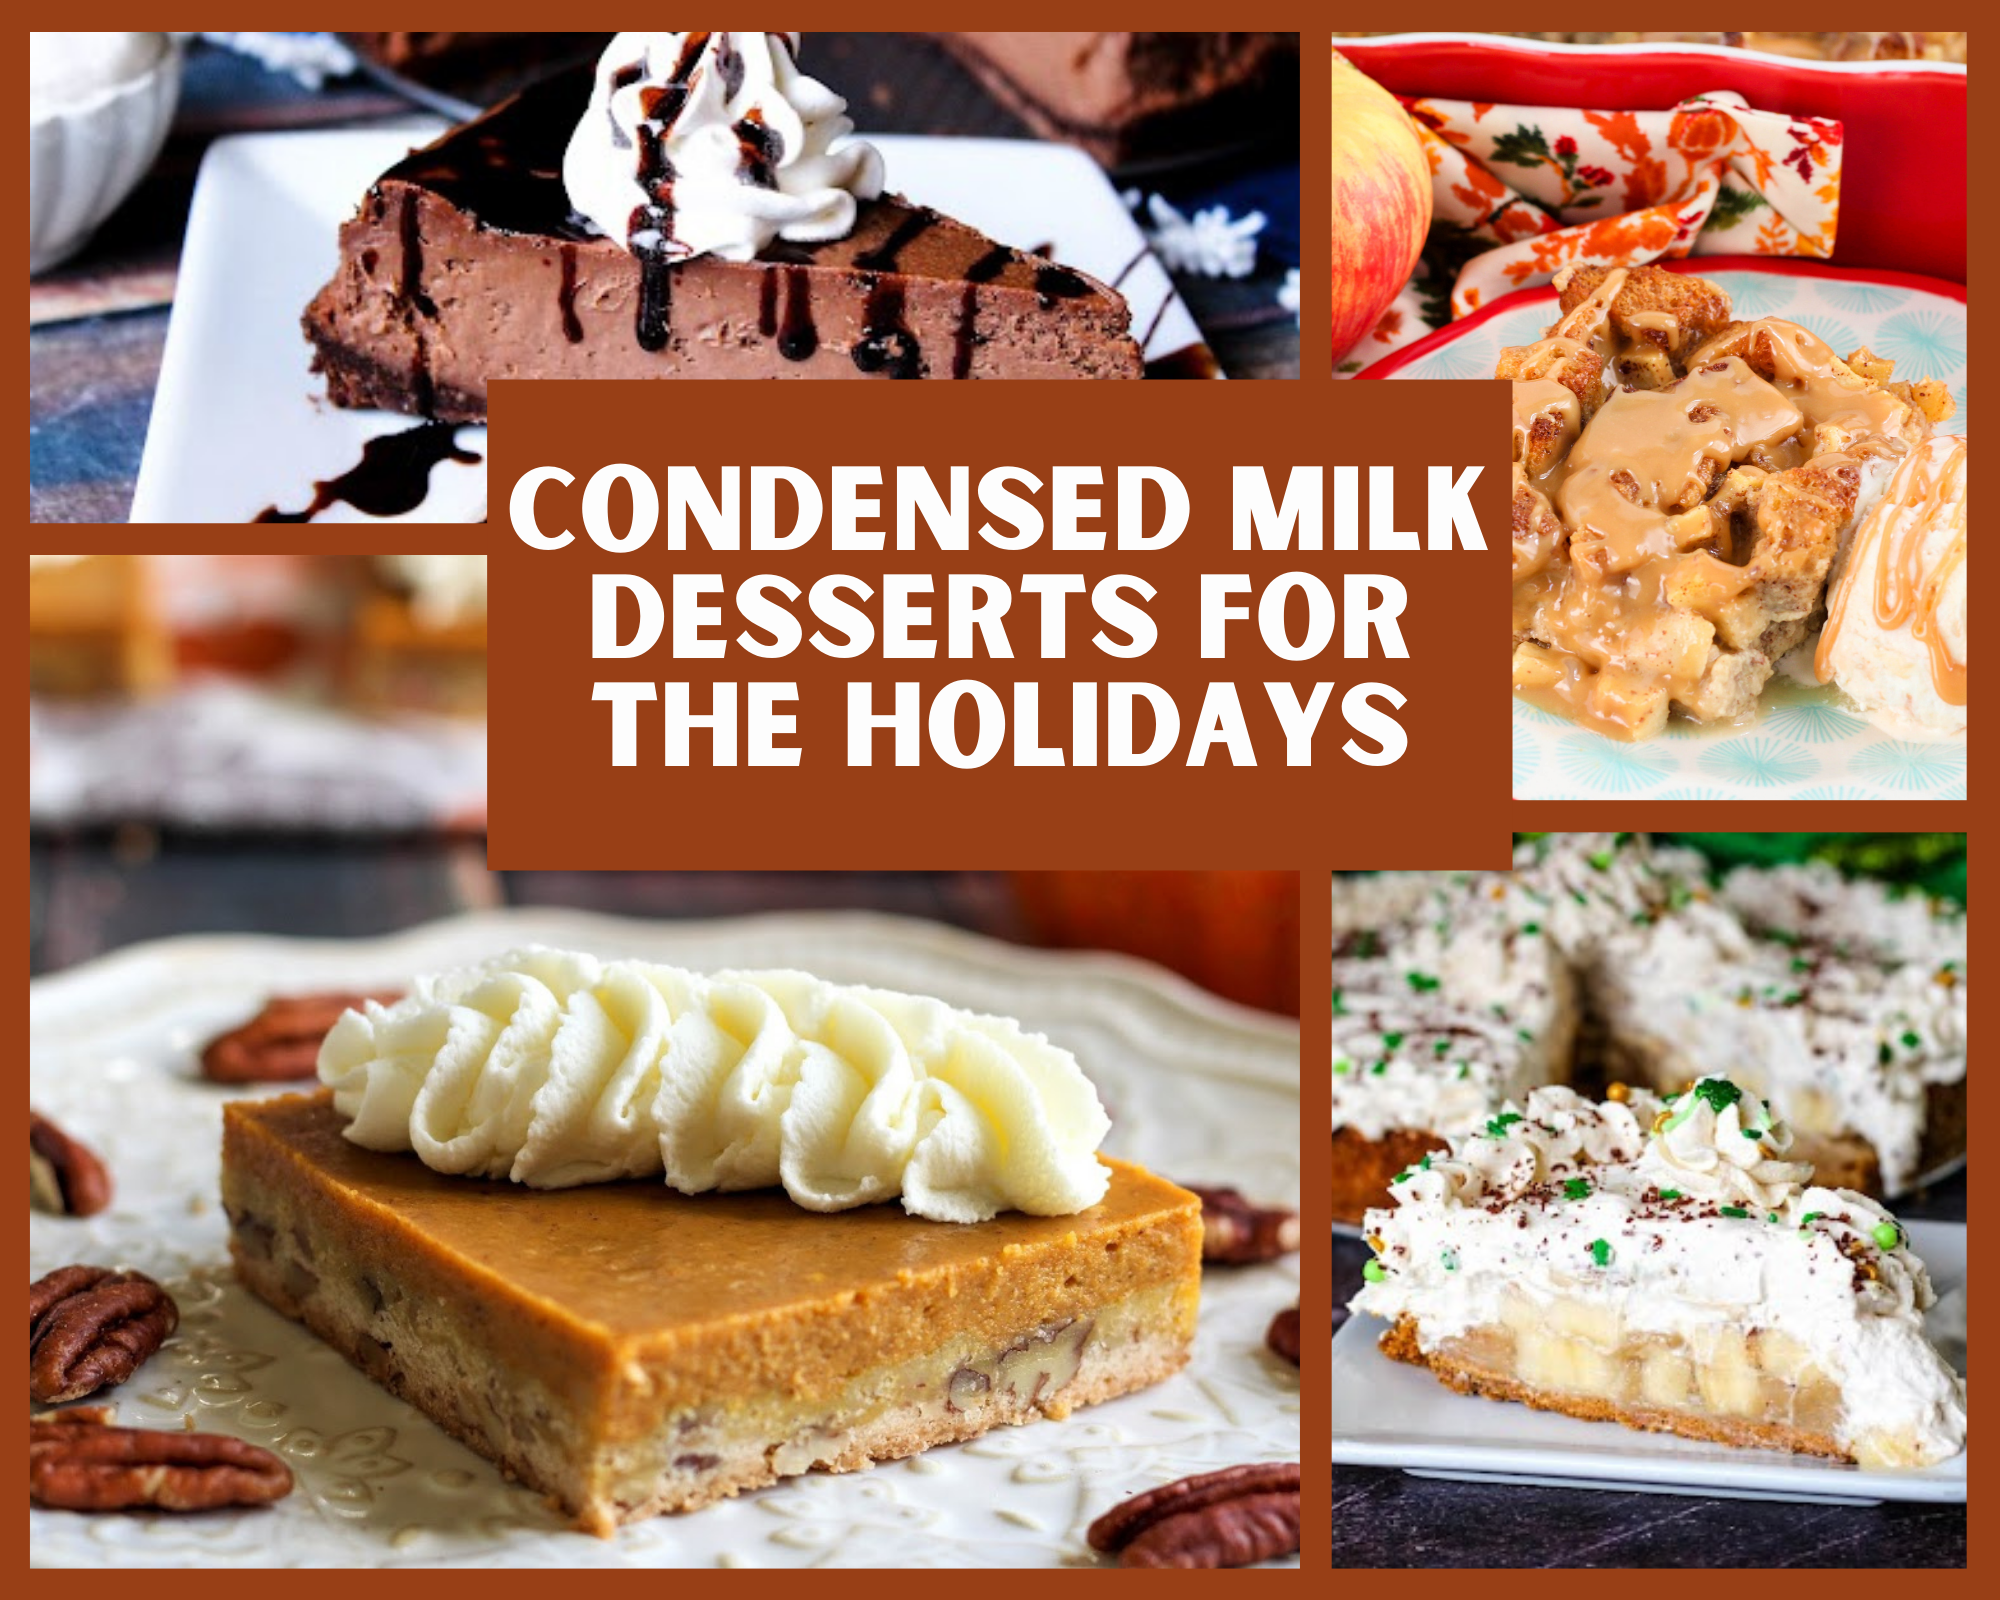 Condensed Milk Desserts for the Holidays